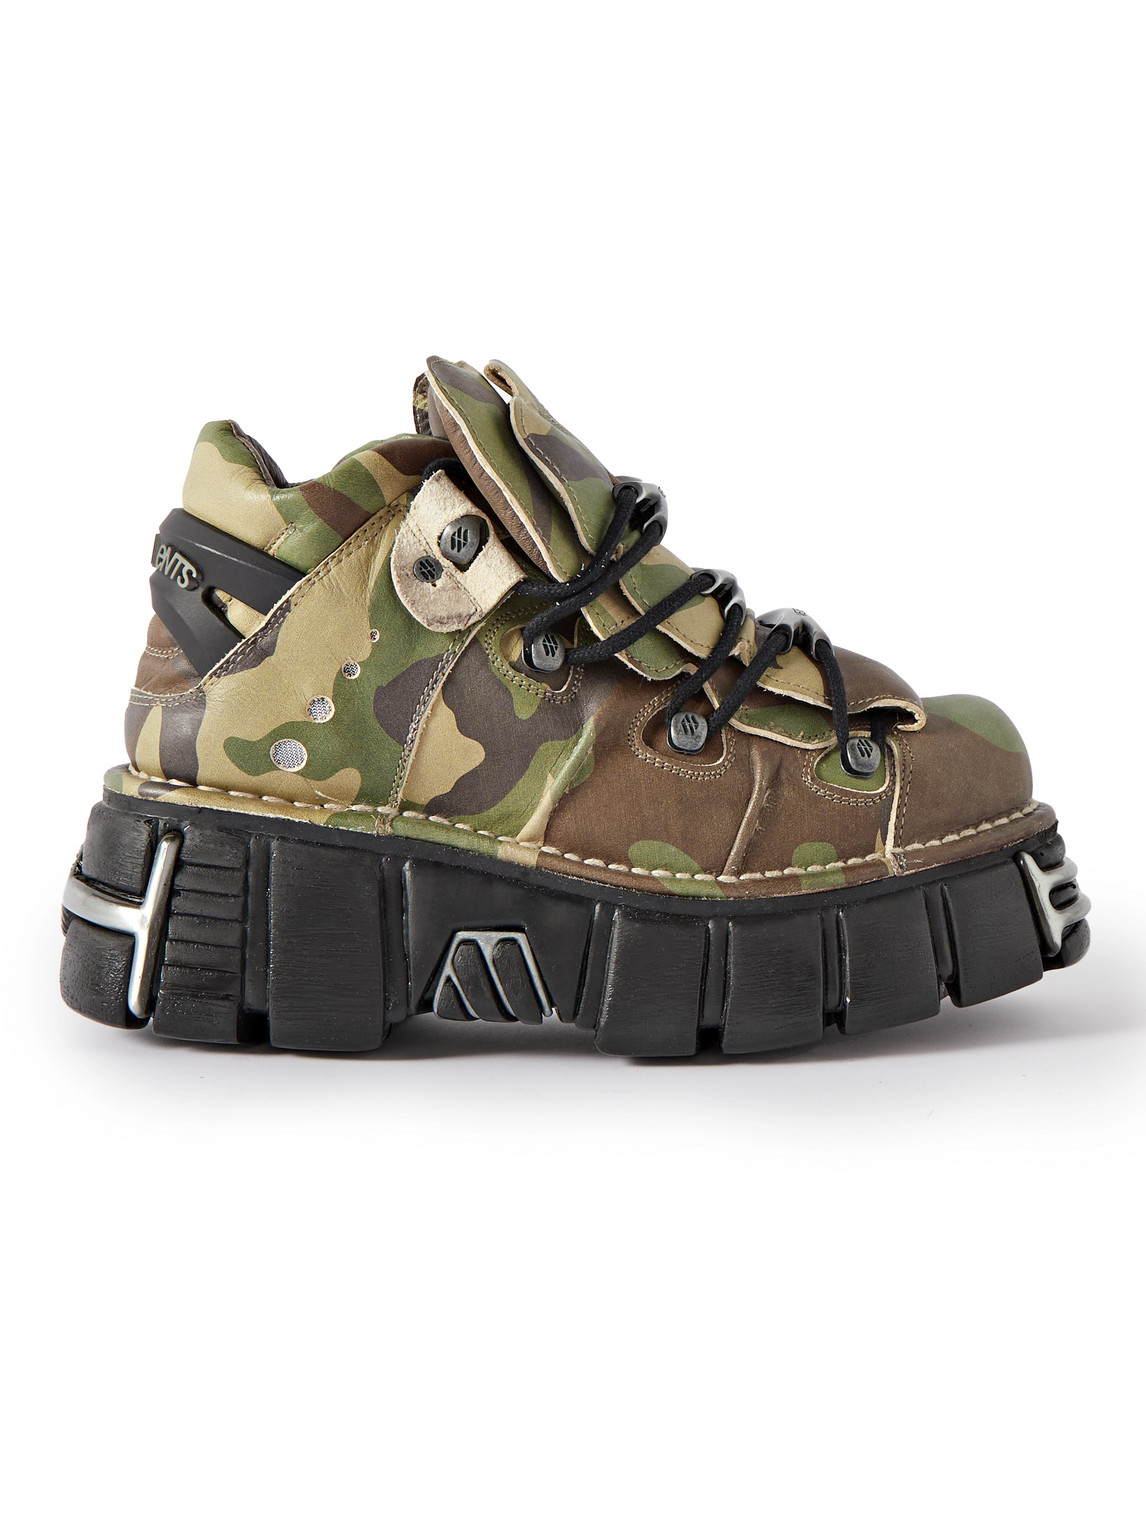 VETEMENTS New Rock Embellished Camouflage-Print Leather Platform Sneakers